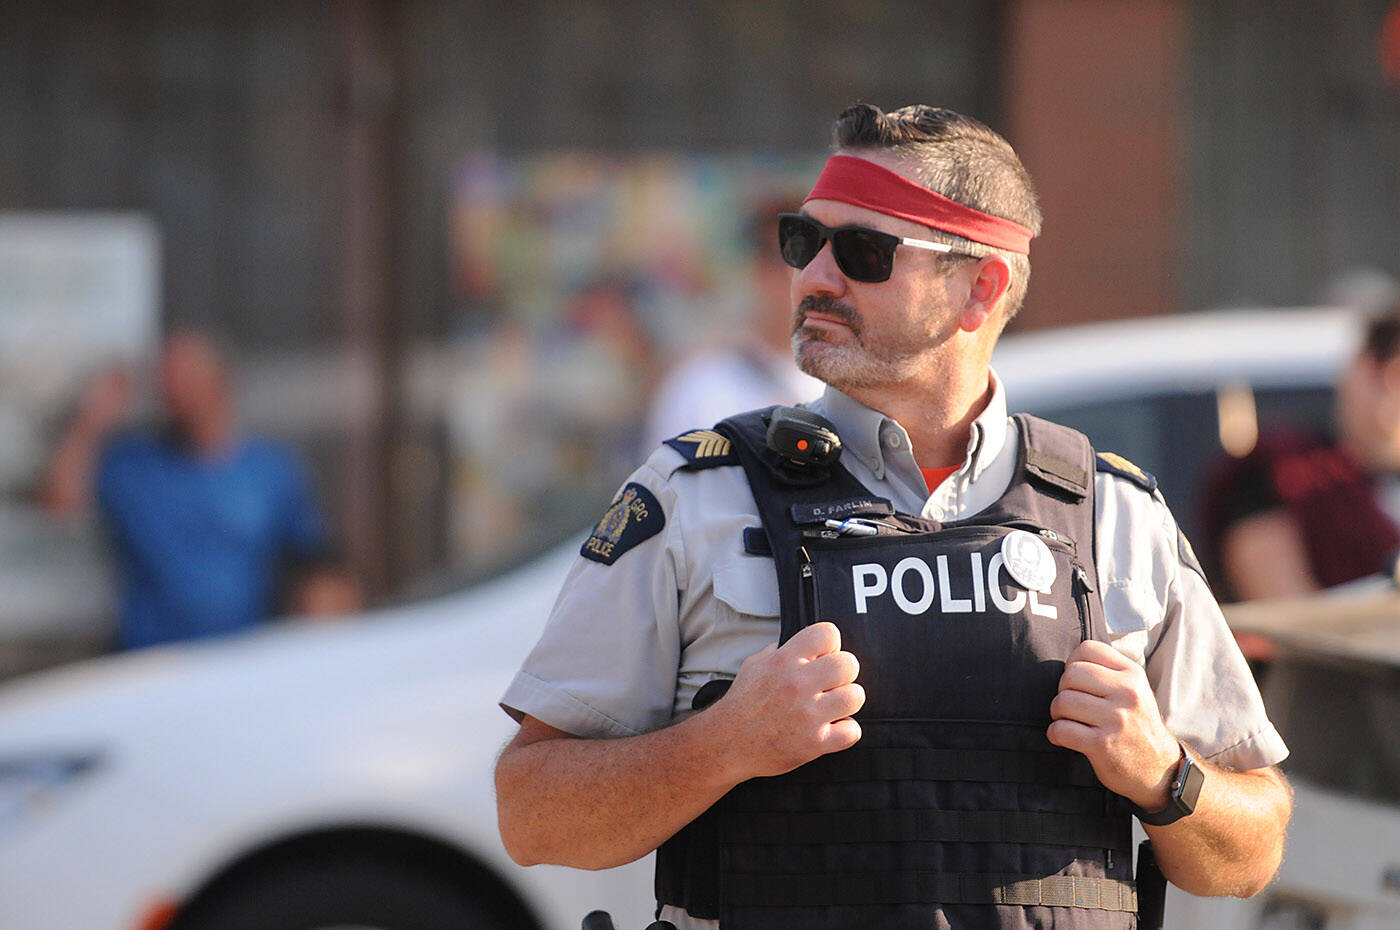 Staff Sgt. Dwayne Farlin with Hope RCMP stands on Wallace Street during the Rambo First Blood 40th Anniversary celebrations in Hope on Saturday, Oct. 8, 2022. (Jenna Hauck/ Black Press Media)